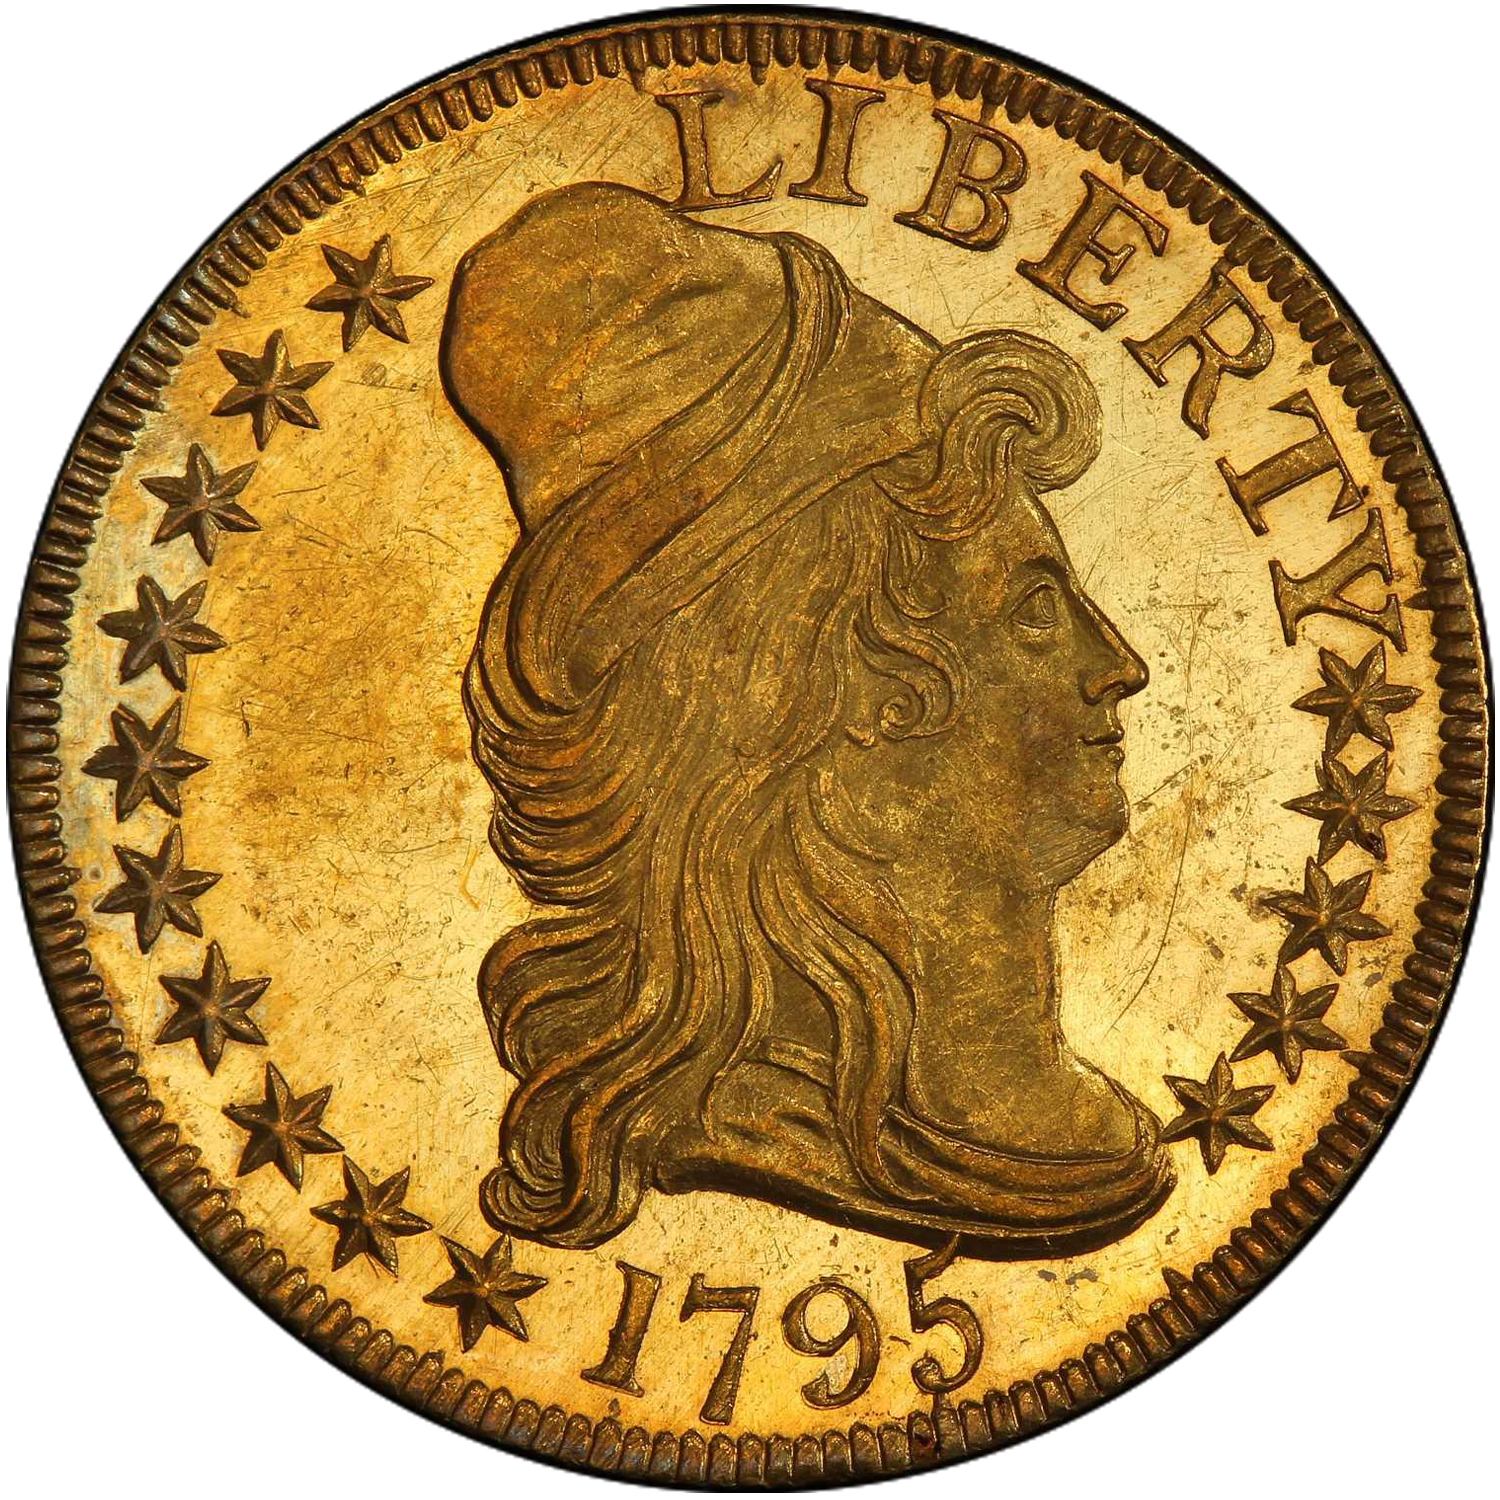 1795 capped bust half eagle guide value